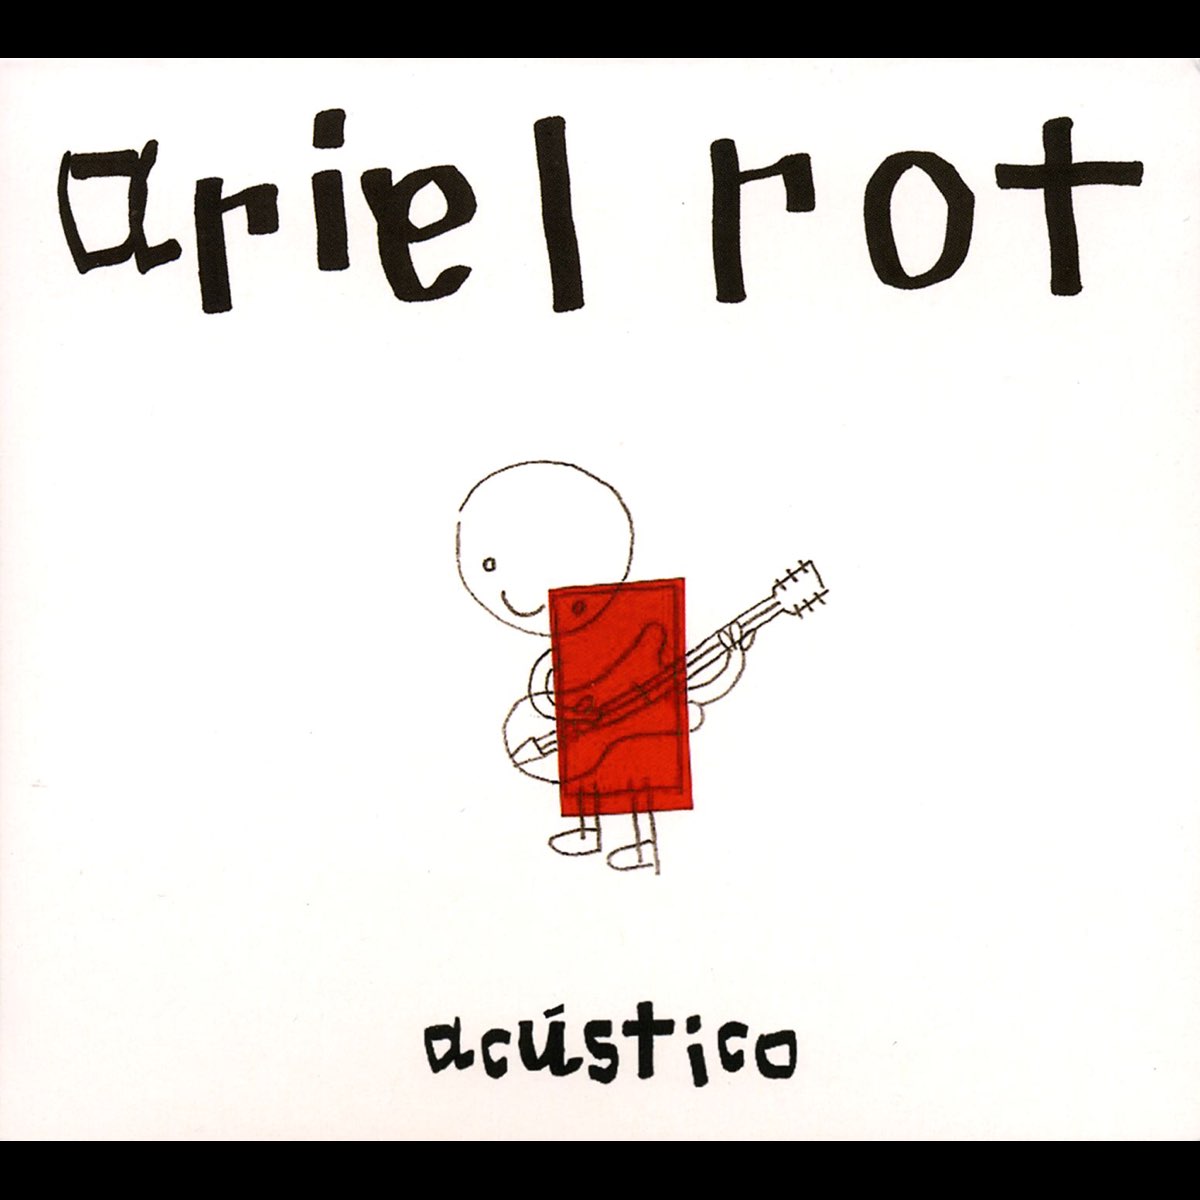 Solo_rot.